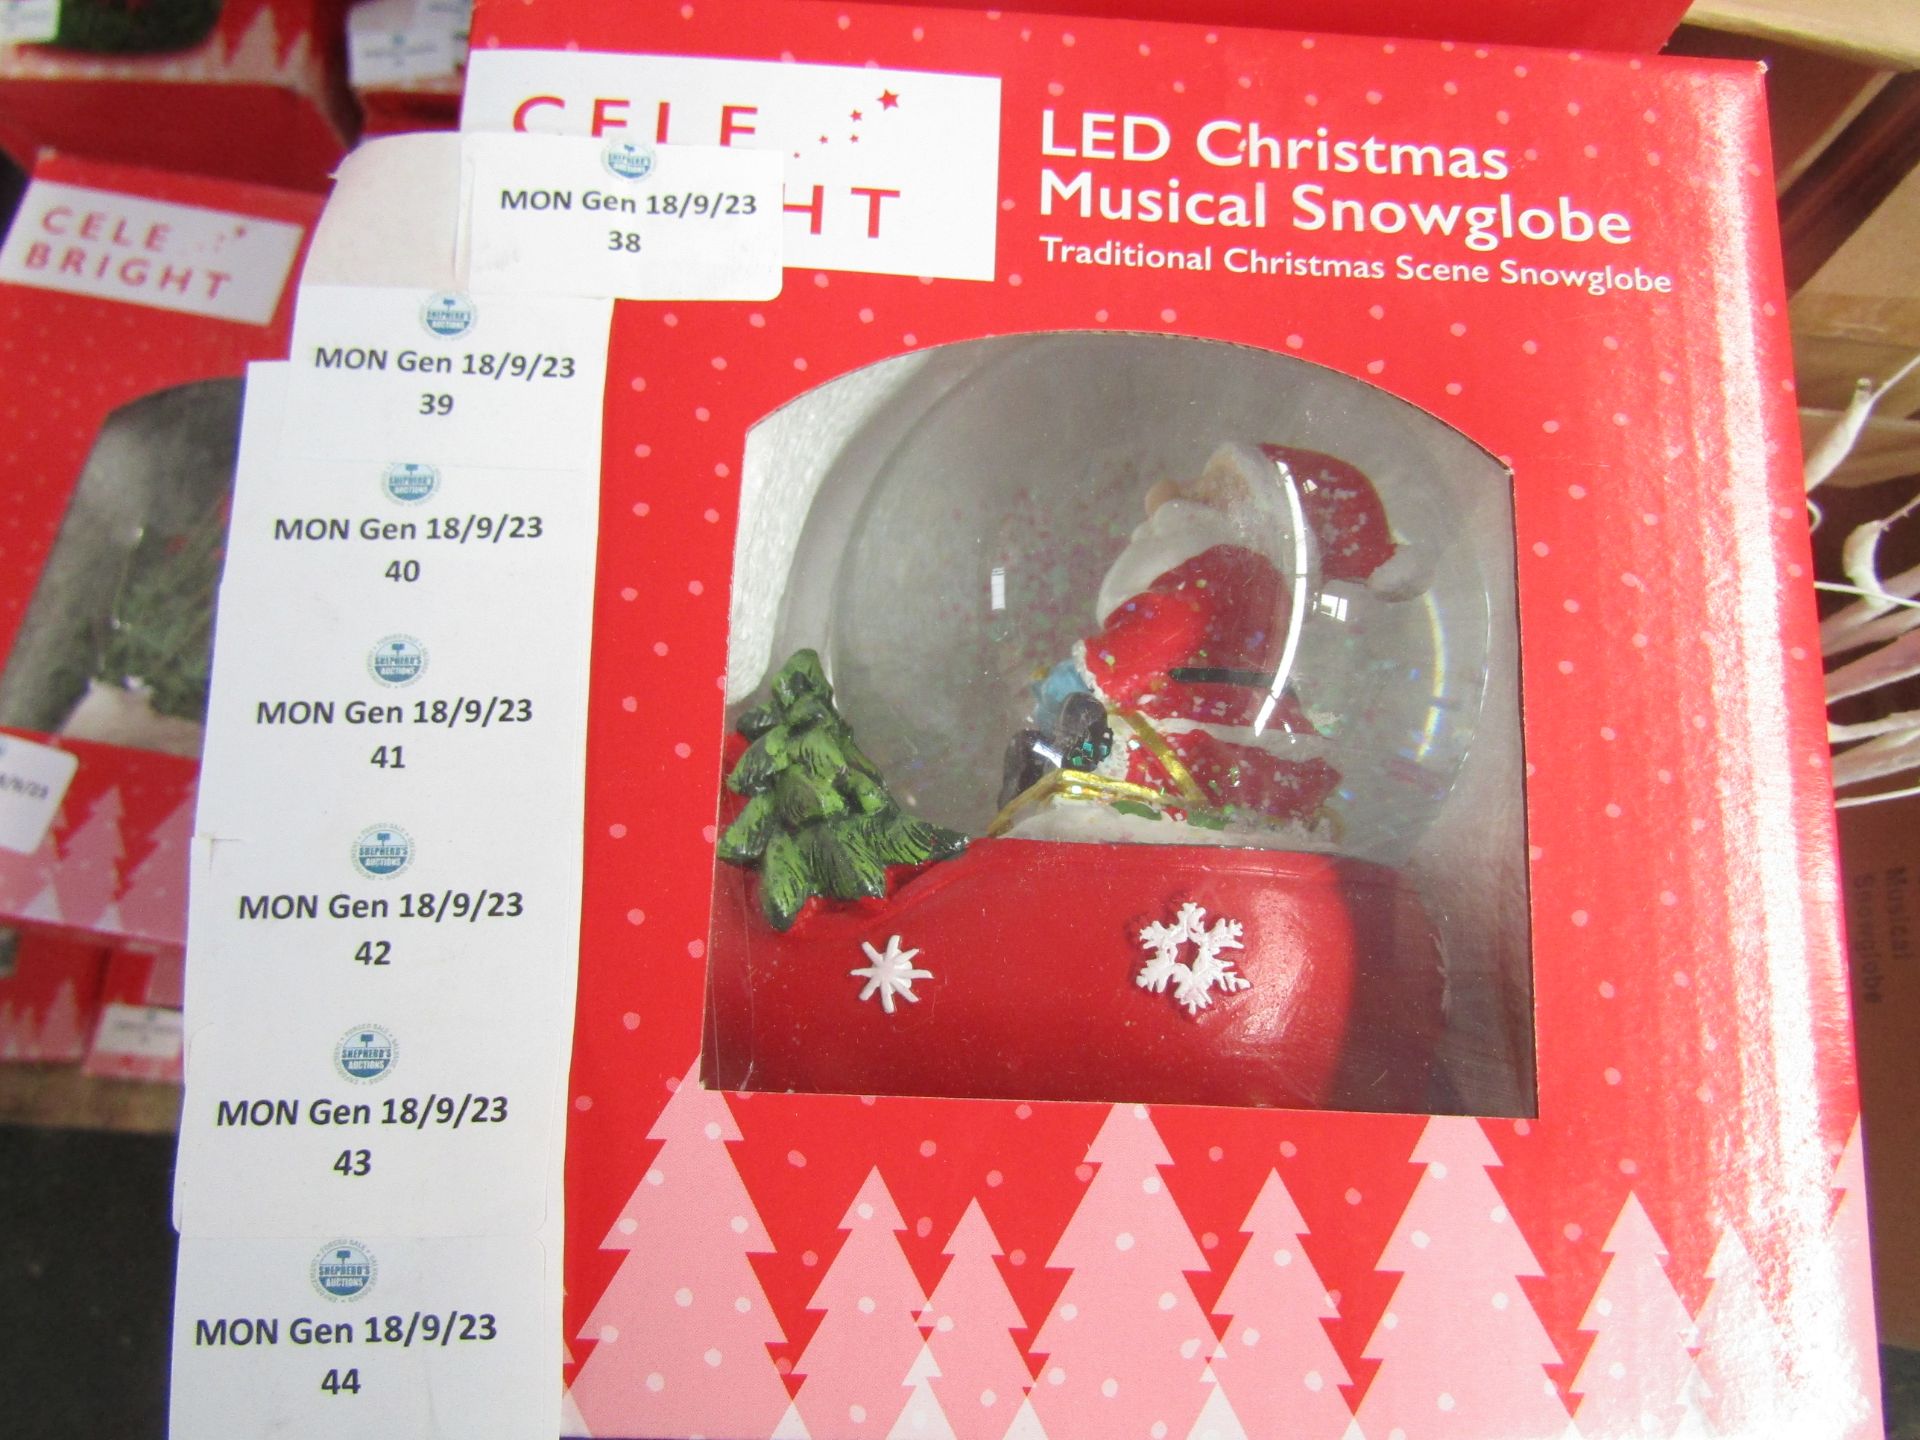 Celebright - LED Christmas Musical Snowglobe - Looks In Good Condition & Boxed.